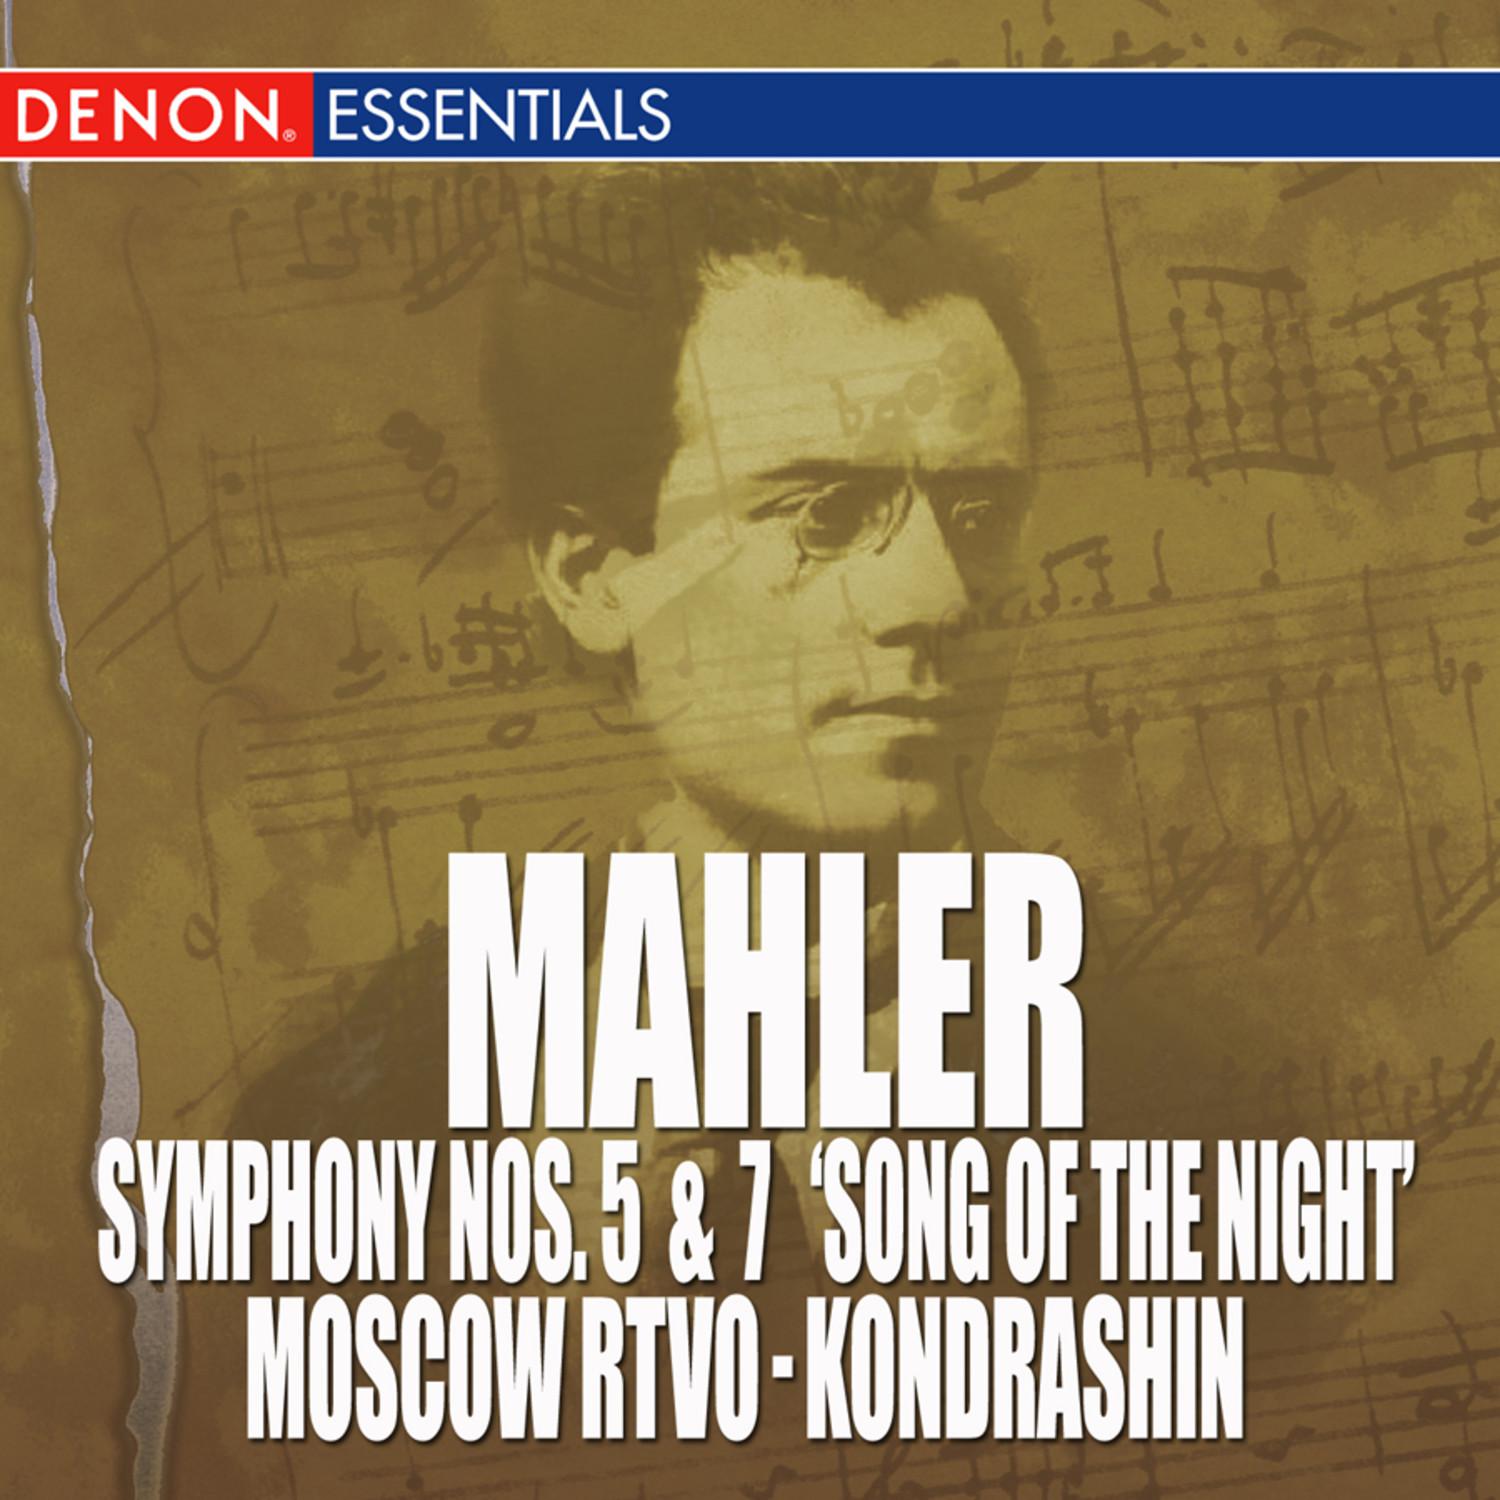 Mahler: Symphony Nos. 5 & 7 "The Song of the Night "